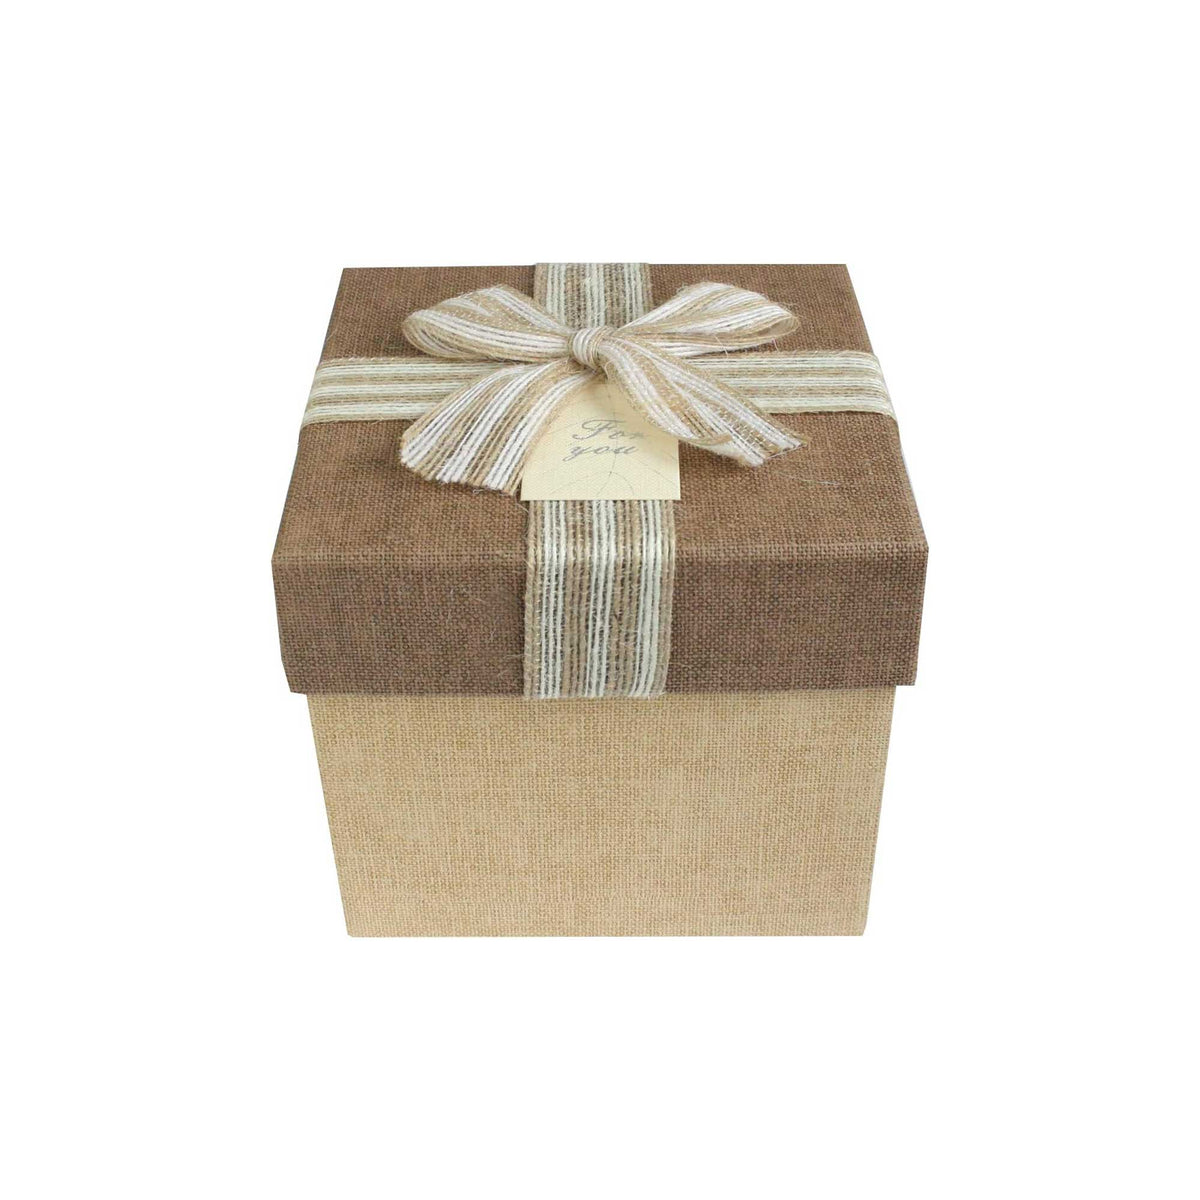 Single Dark Brown Gift Box with Striped Bow Ribbon (Sizes Available)